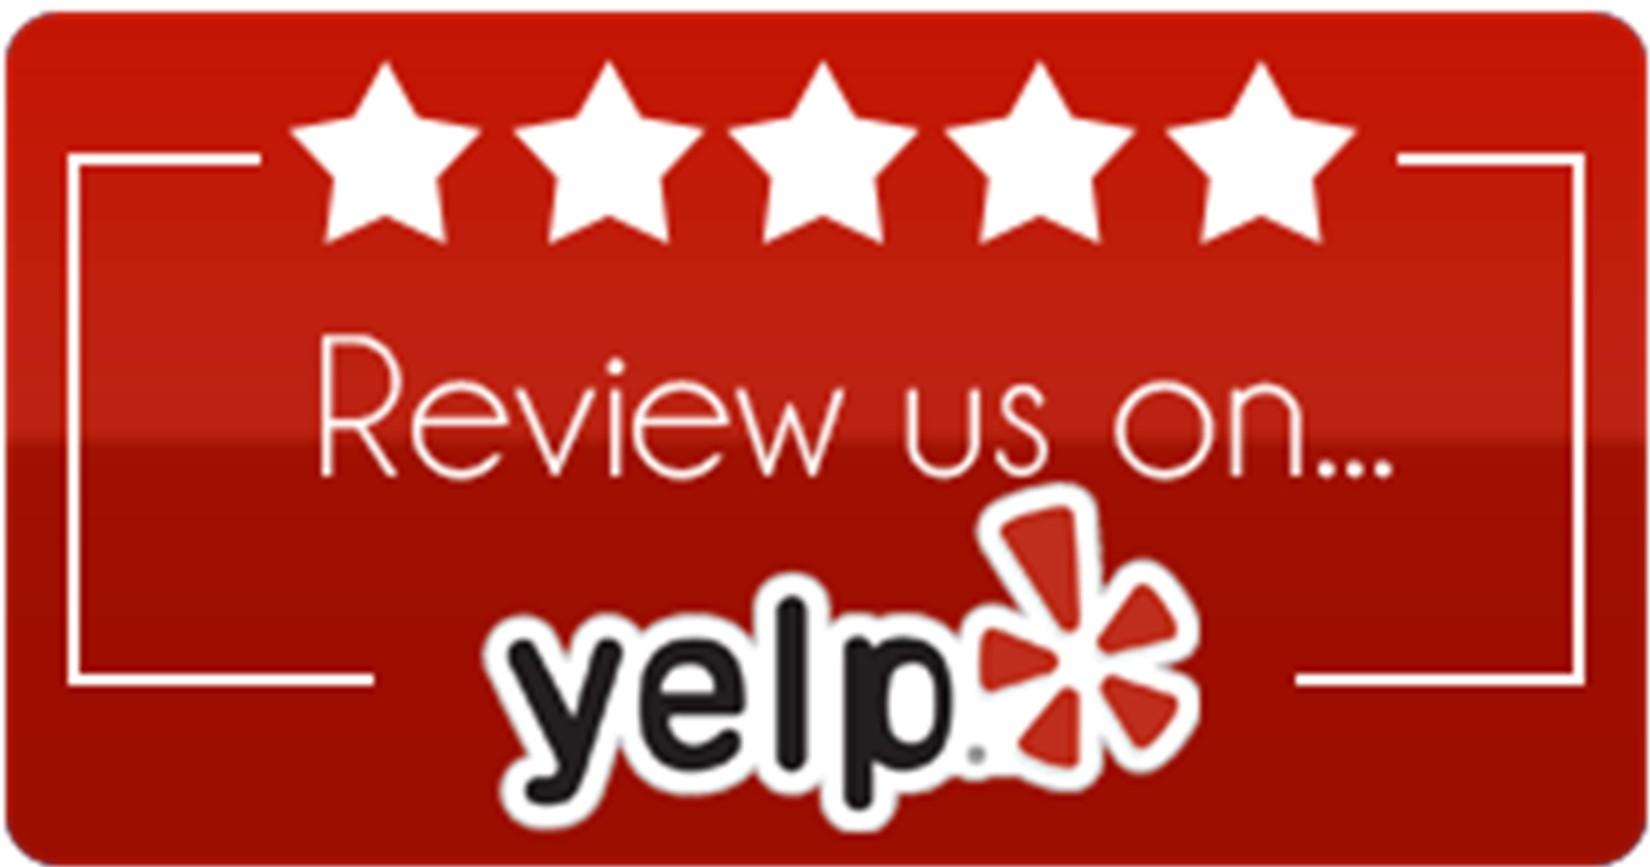 Review Us On Yelp Logo - review-us-on-yelp | OnTheMarcMedia